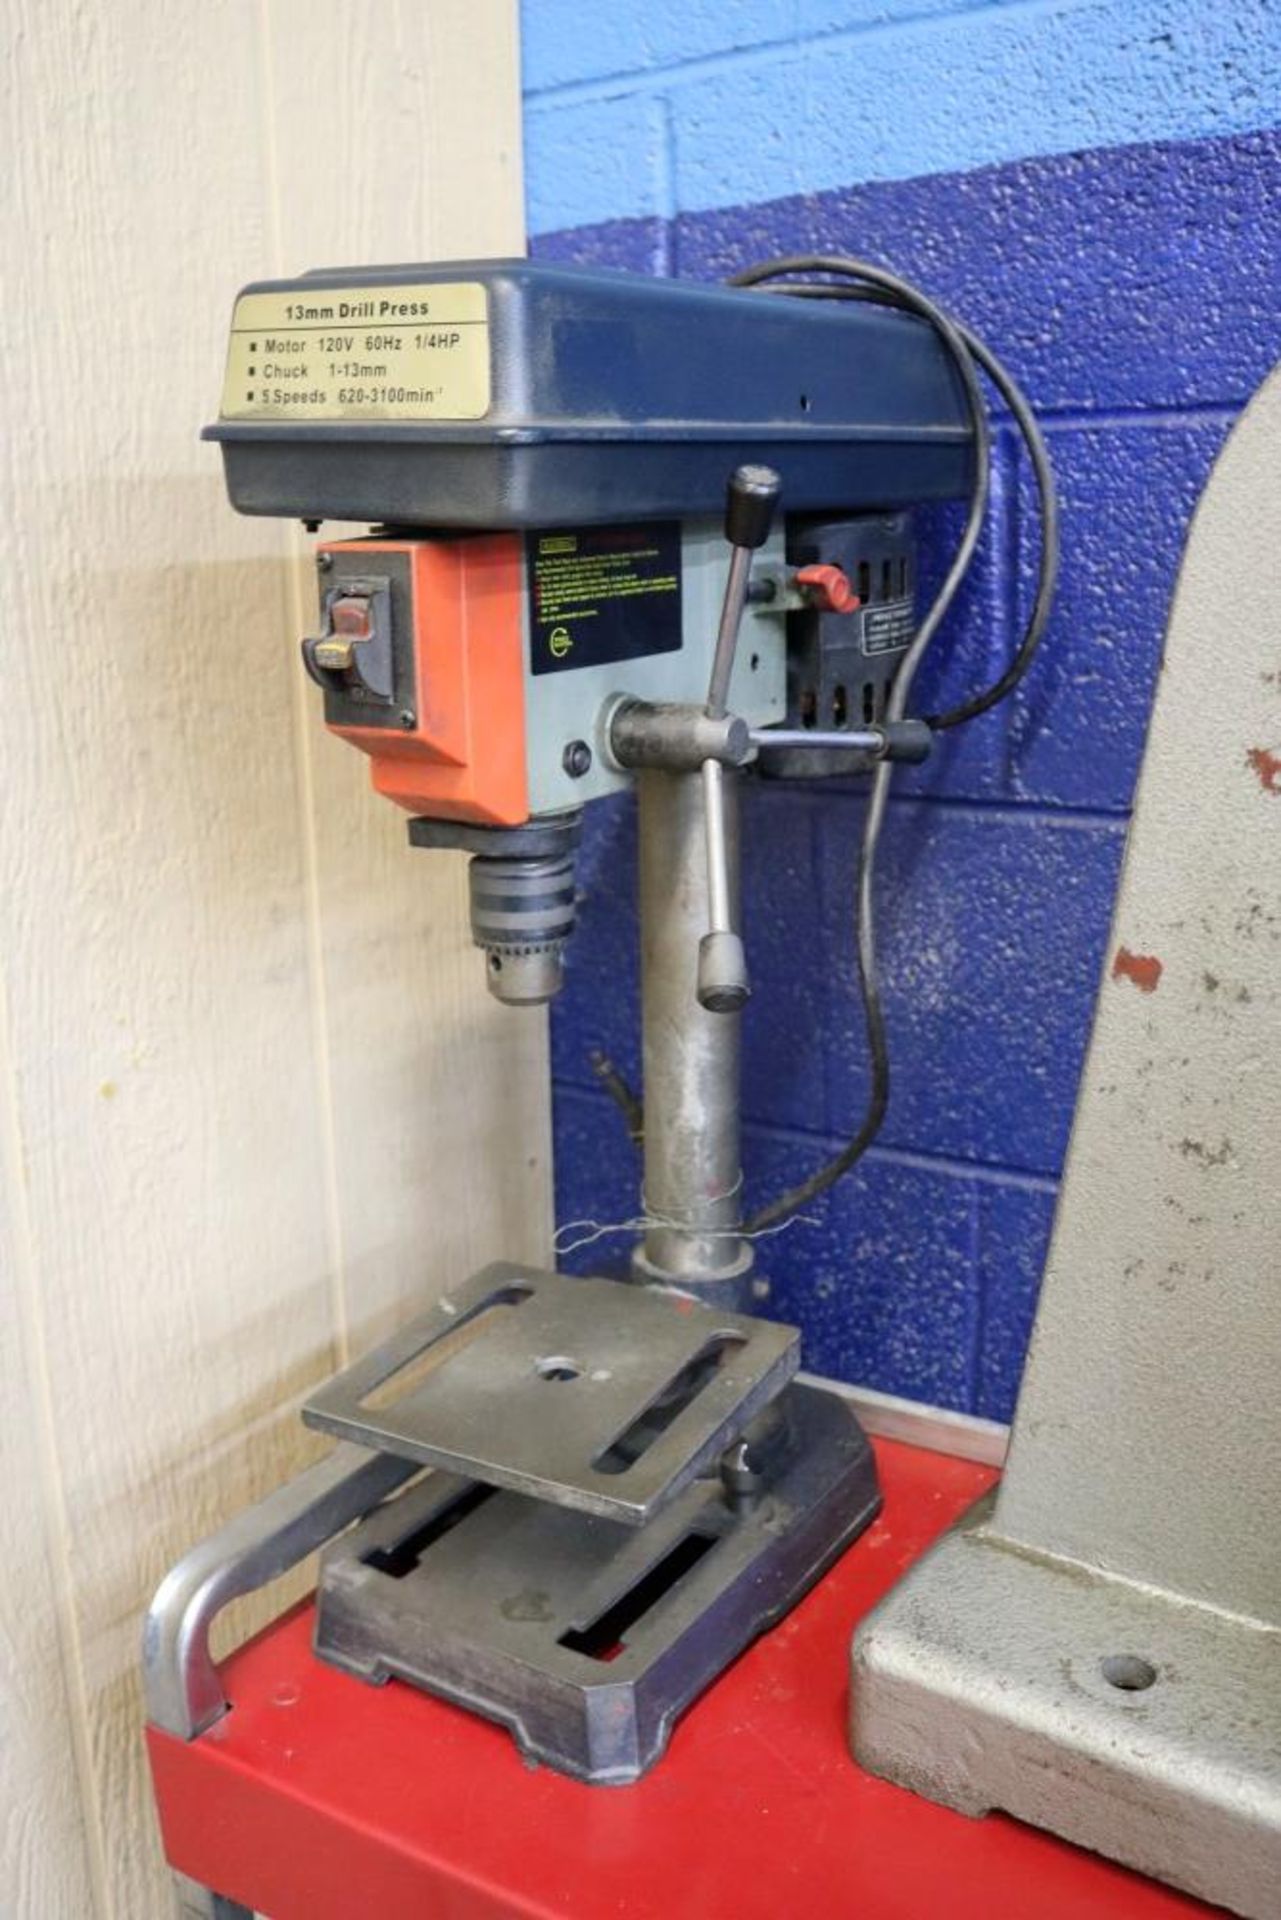 13mm Drill Press Model RDM-1301B, 5 Speed, 1/4 HP and Accu-Tapper By LSMW with Jacob Chuck - Image 2 of 9